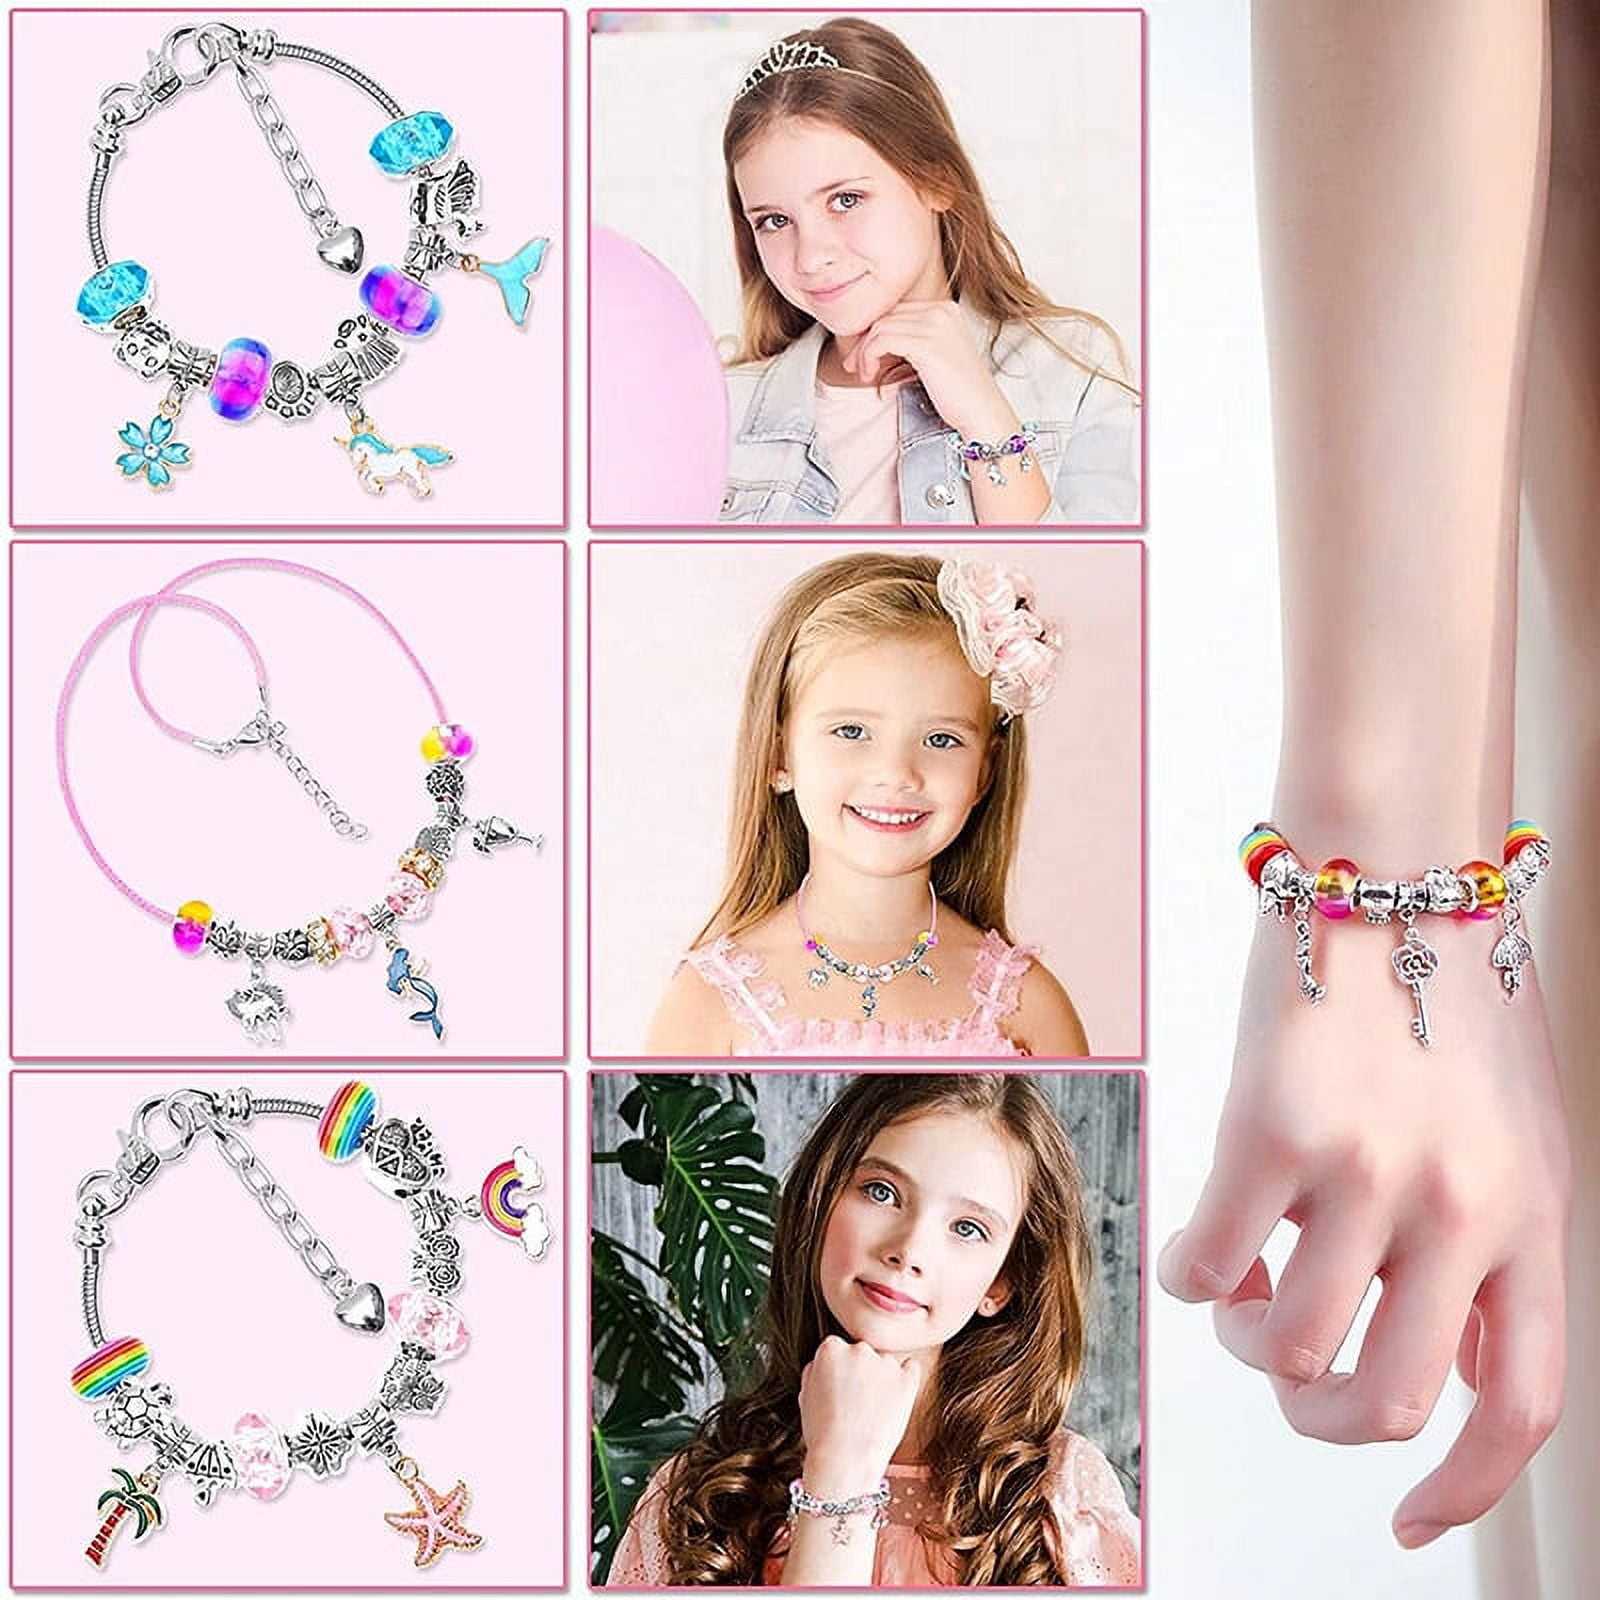  HuckyMoor Bag and Bracelet Making Kit, DIY Jewelry Crafts for  Girls Ages 4-12 with Beads and Supplies for Personalized Art, Gift for  Creative Teens : Toys & Games